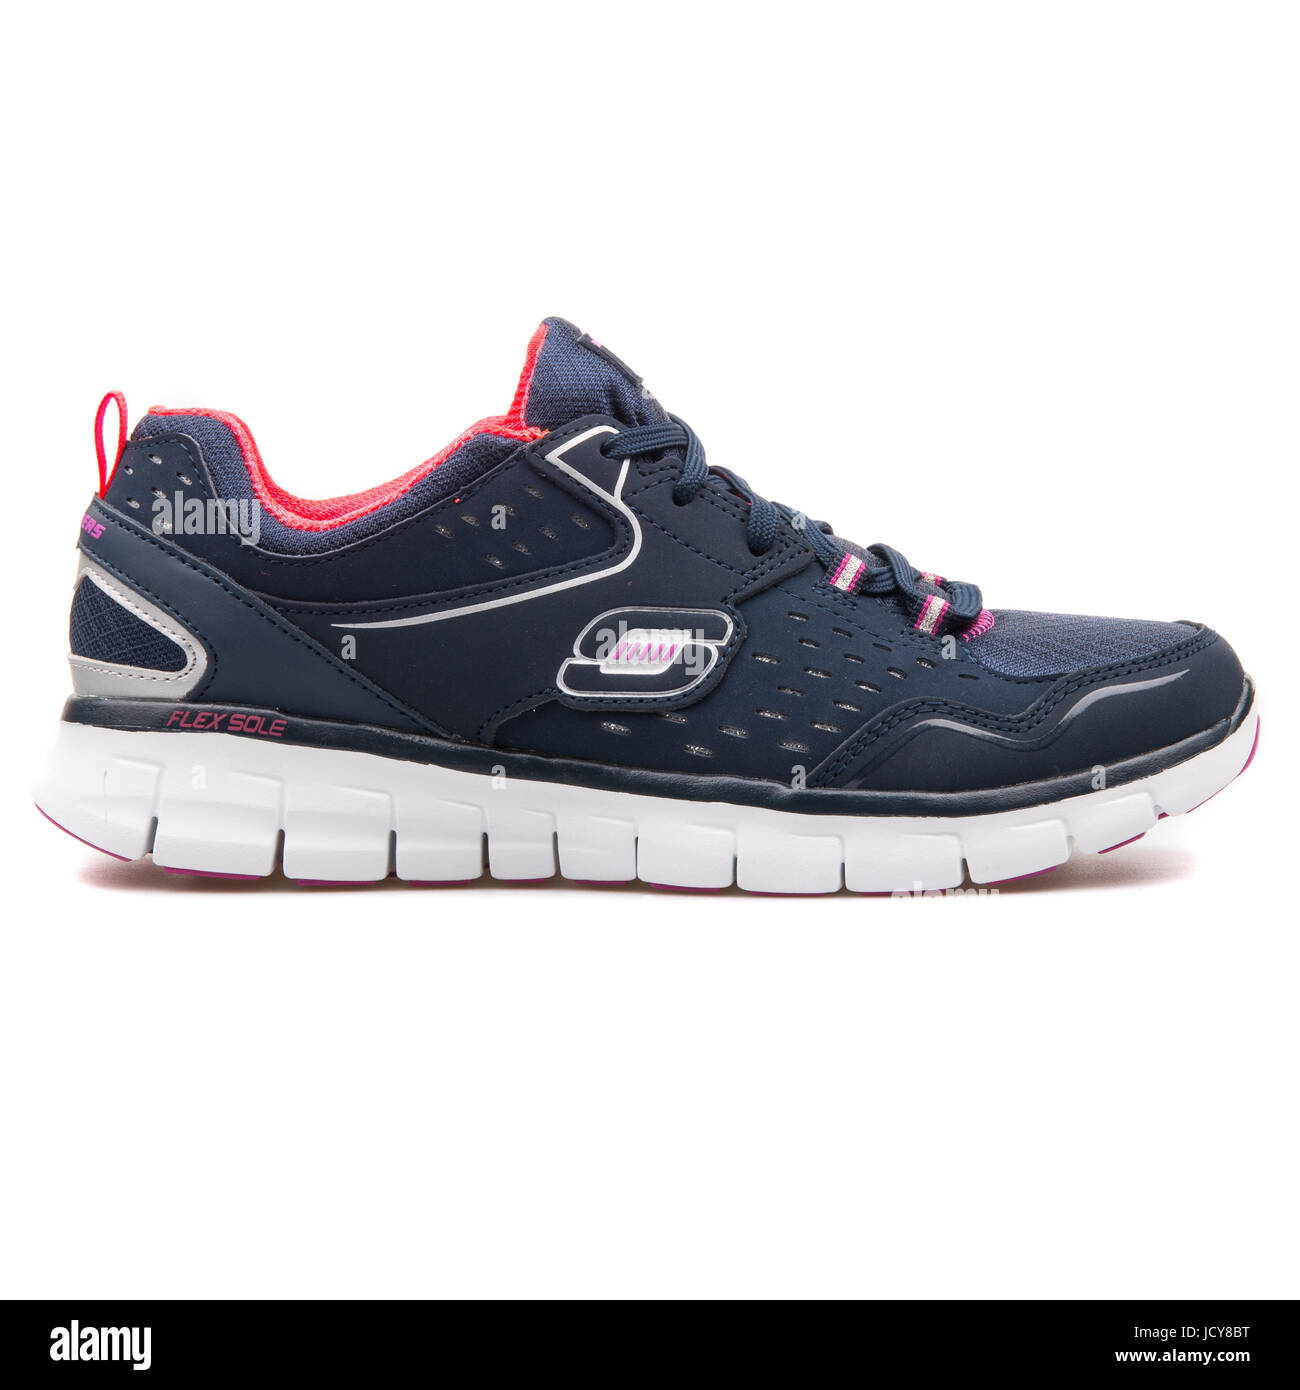 Skechers Synergy Front Row Navy Blue and Purple Women's Running Shoes -  12013-NVPR Stock Photo - Alamy